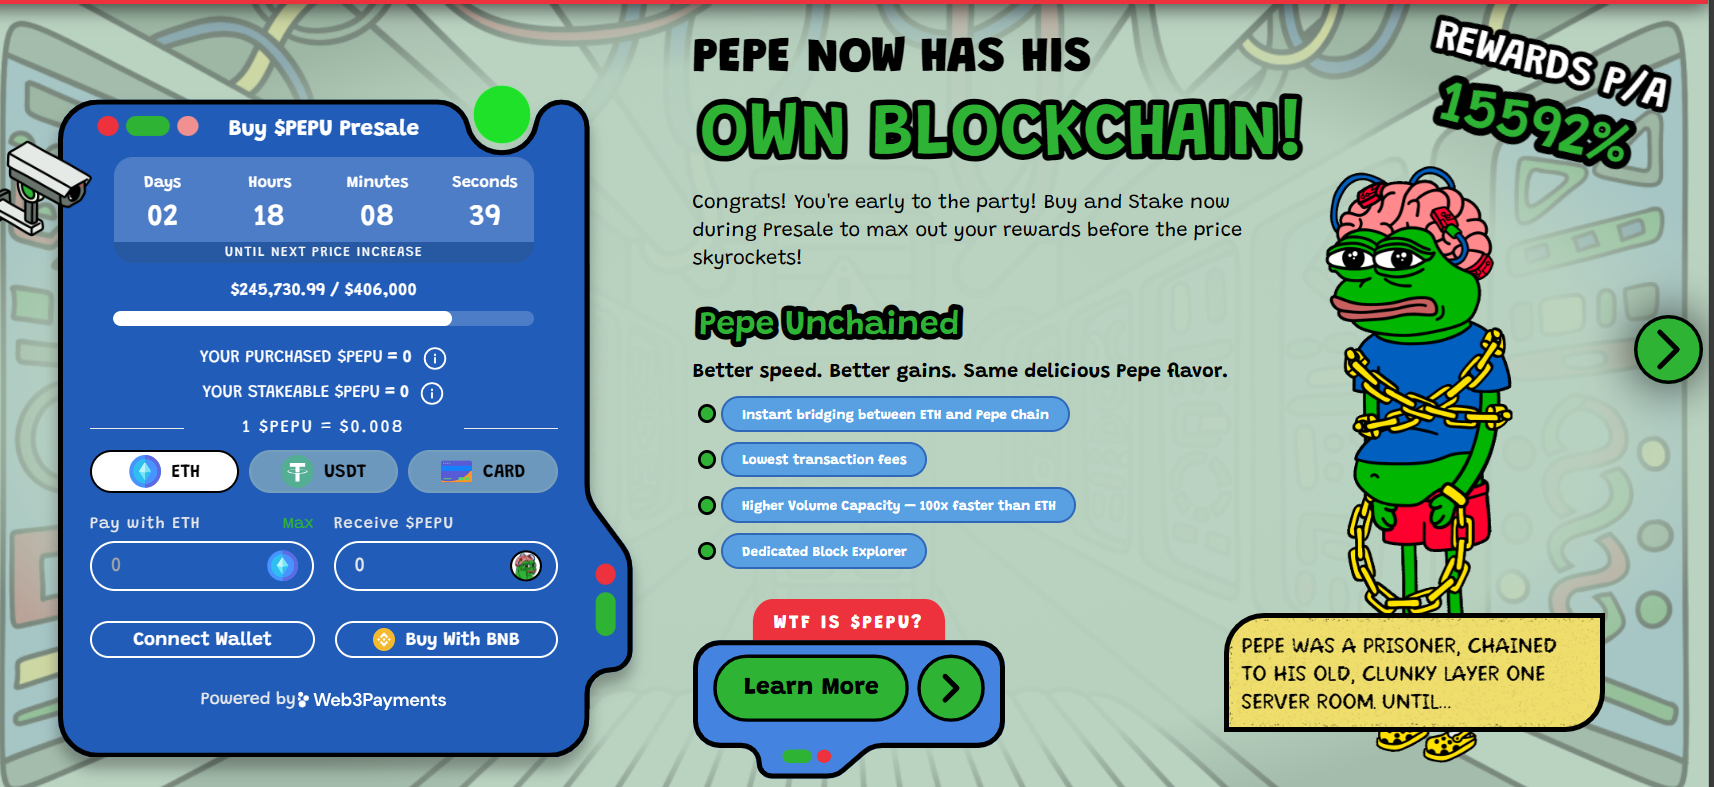 The Pepe Unchained presale homepage